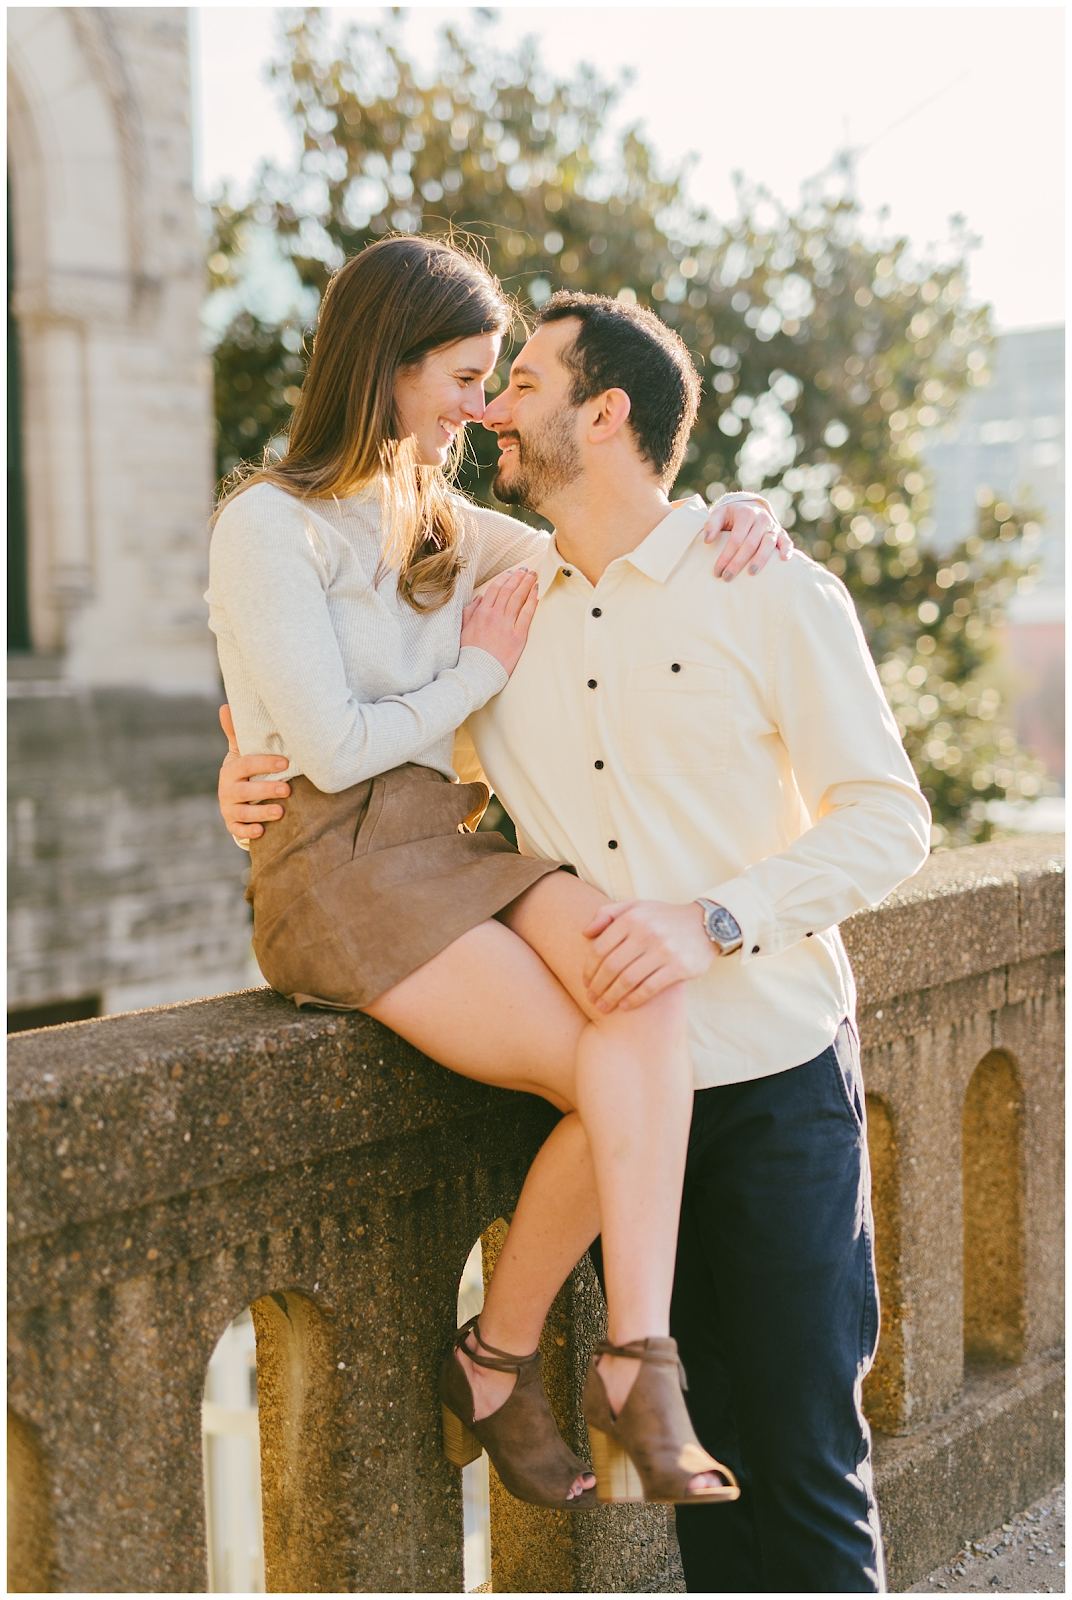 The Best Nashville Engagement Session Locations from Kéra Photography